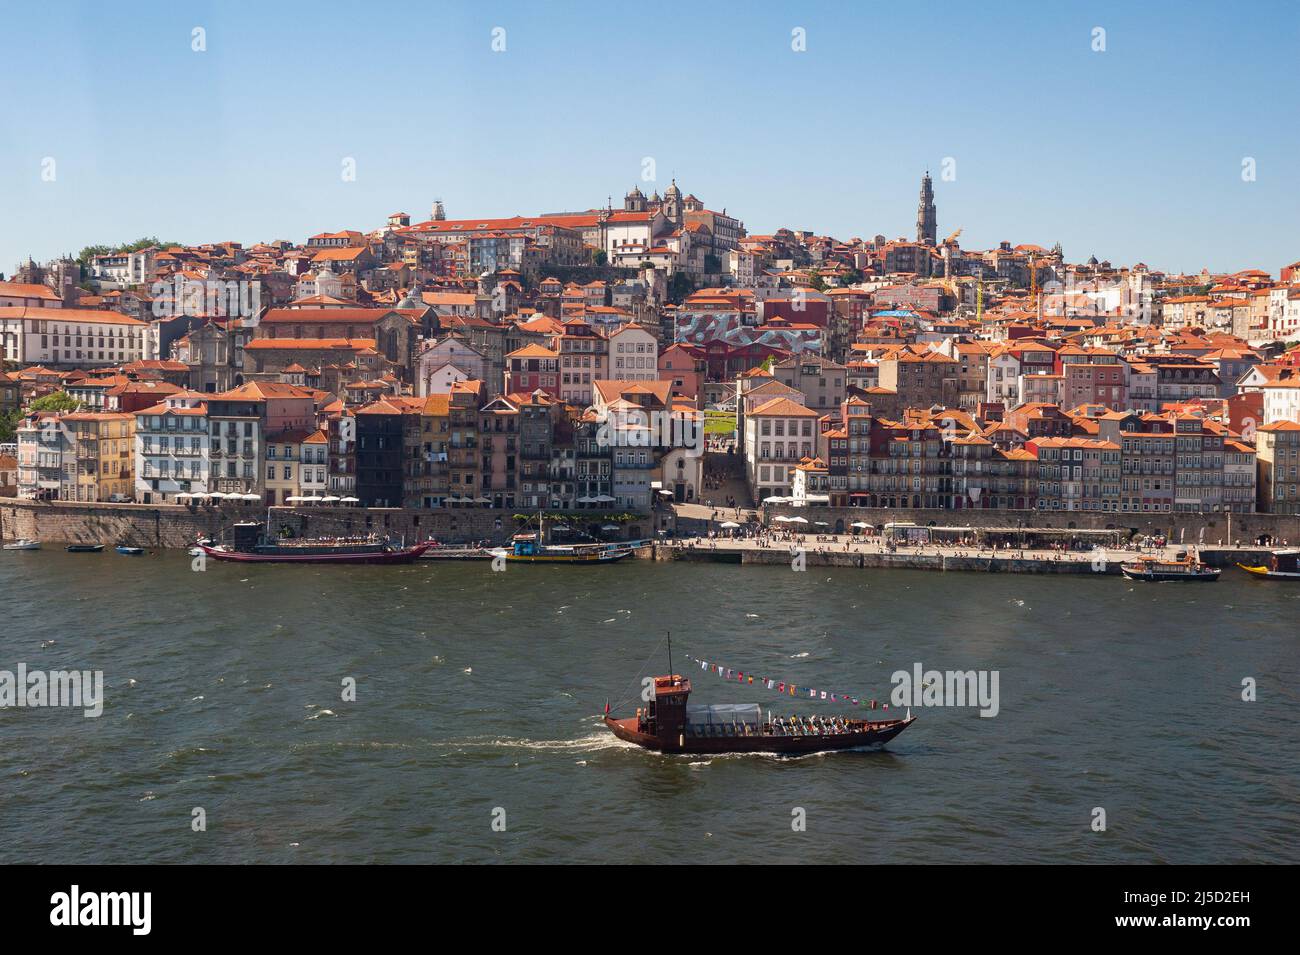 06/14/2018, Porto, Portugal, Europe - City view with the historic old town Ribeira and traditional buildings along the waterfront Cais da Ribeira at the Douro river. [automated translation] Stock Photo